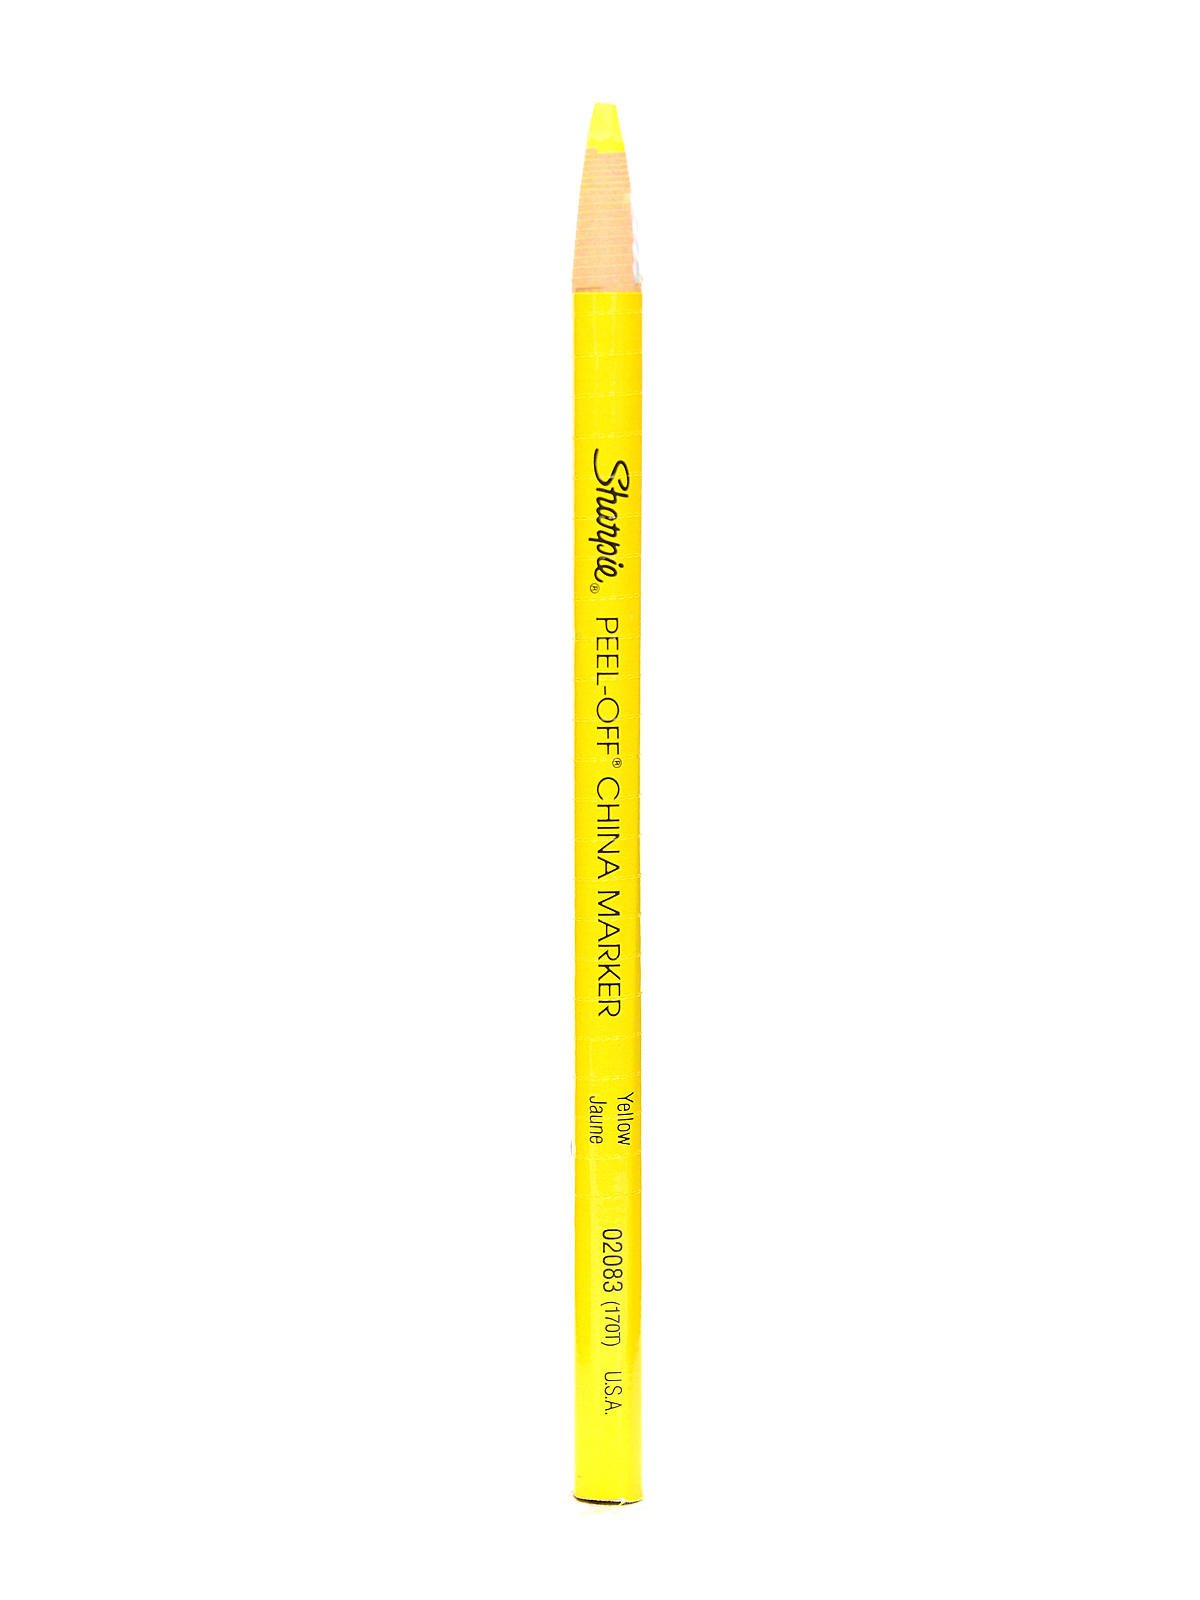 YELLOW CHINA markers peel-off grease pencils (12 count) $11.99